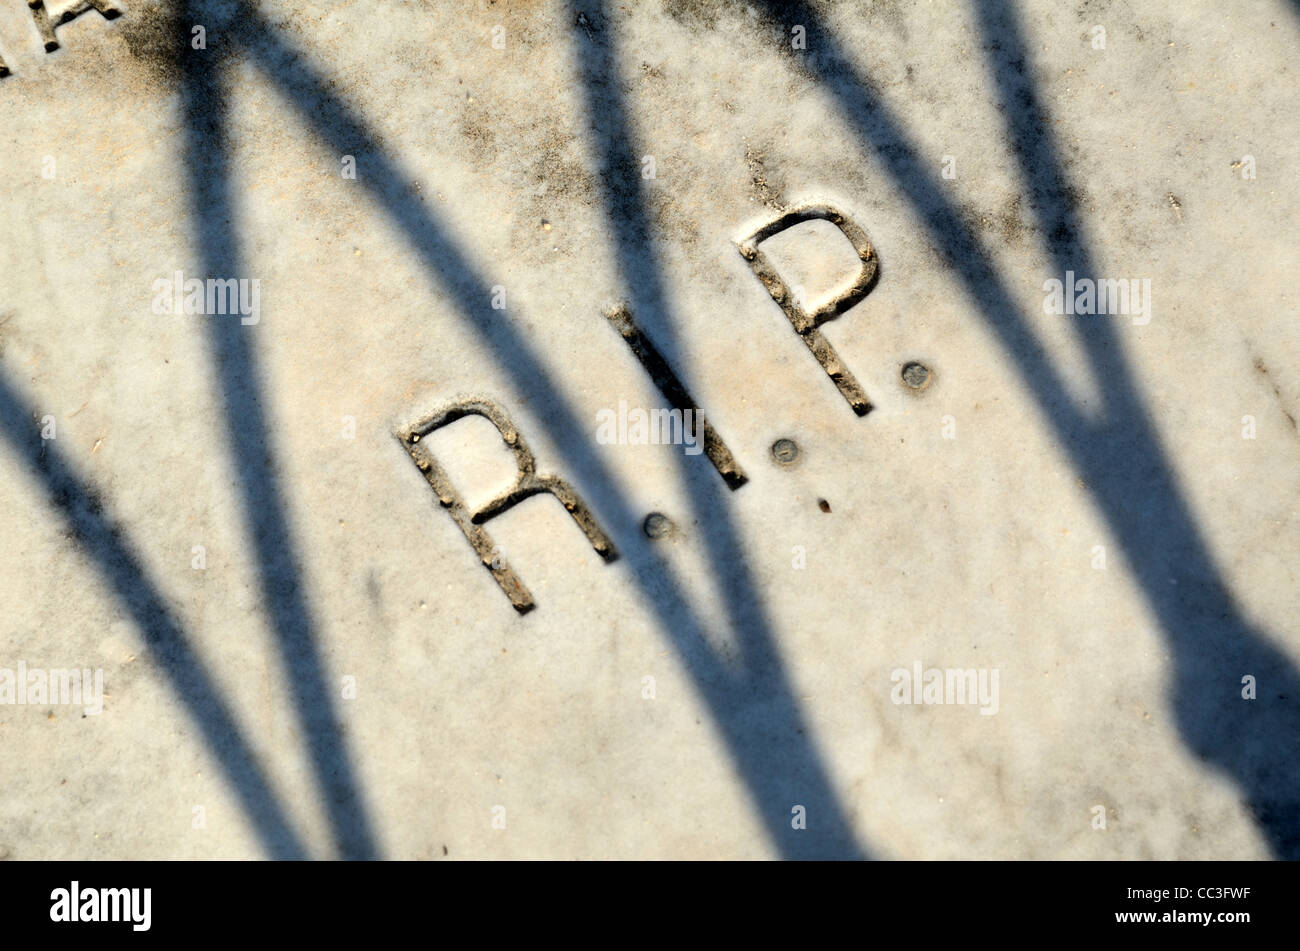 RIP Rest in Peace written on a Tombstone, Grave or Tomb in the Old Cemetery, Graveyard or Cimitière du Vieux Château Menton France Stock Photo